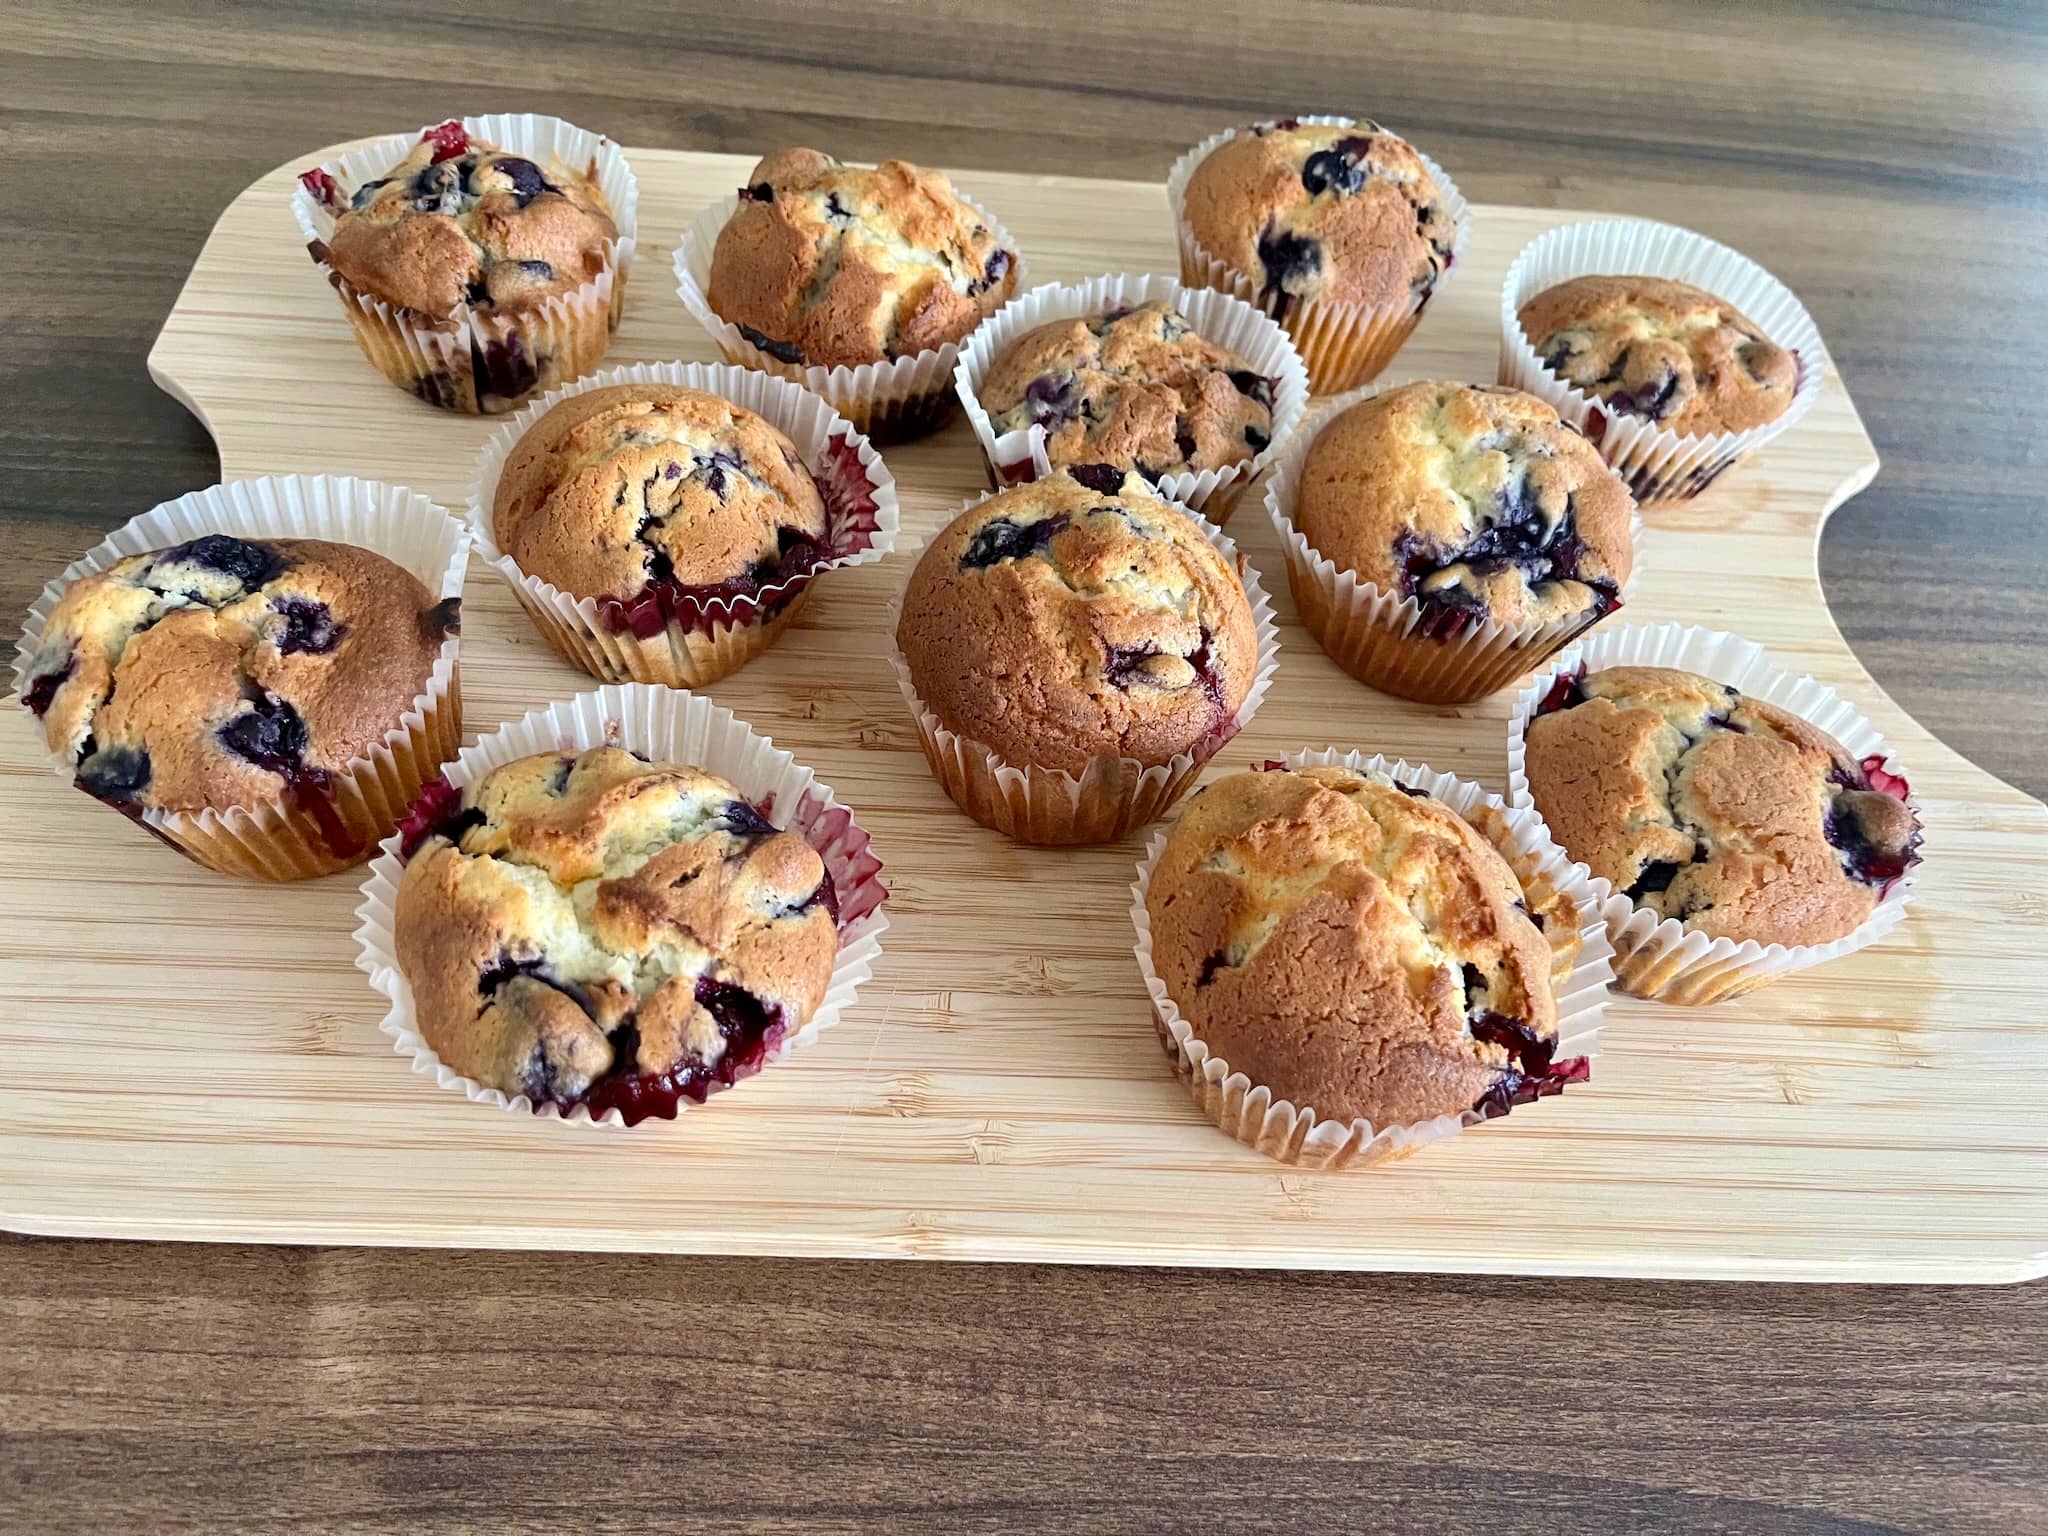 Baked blueberry muffins cooling down on the board